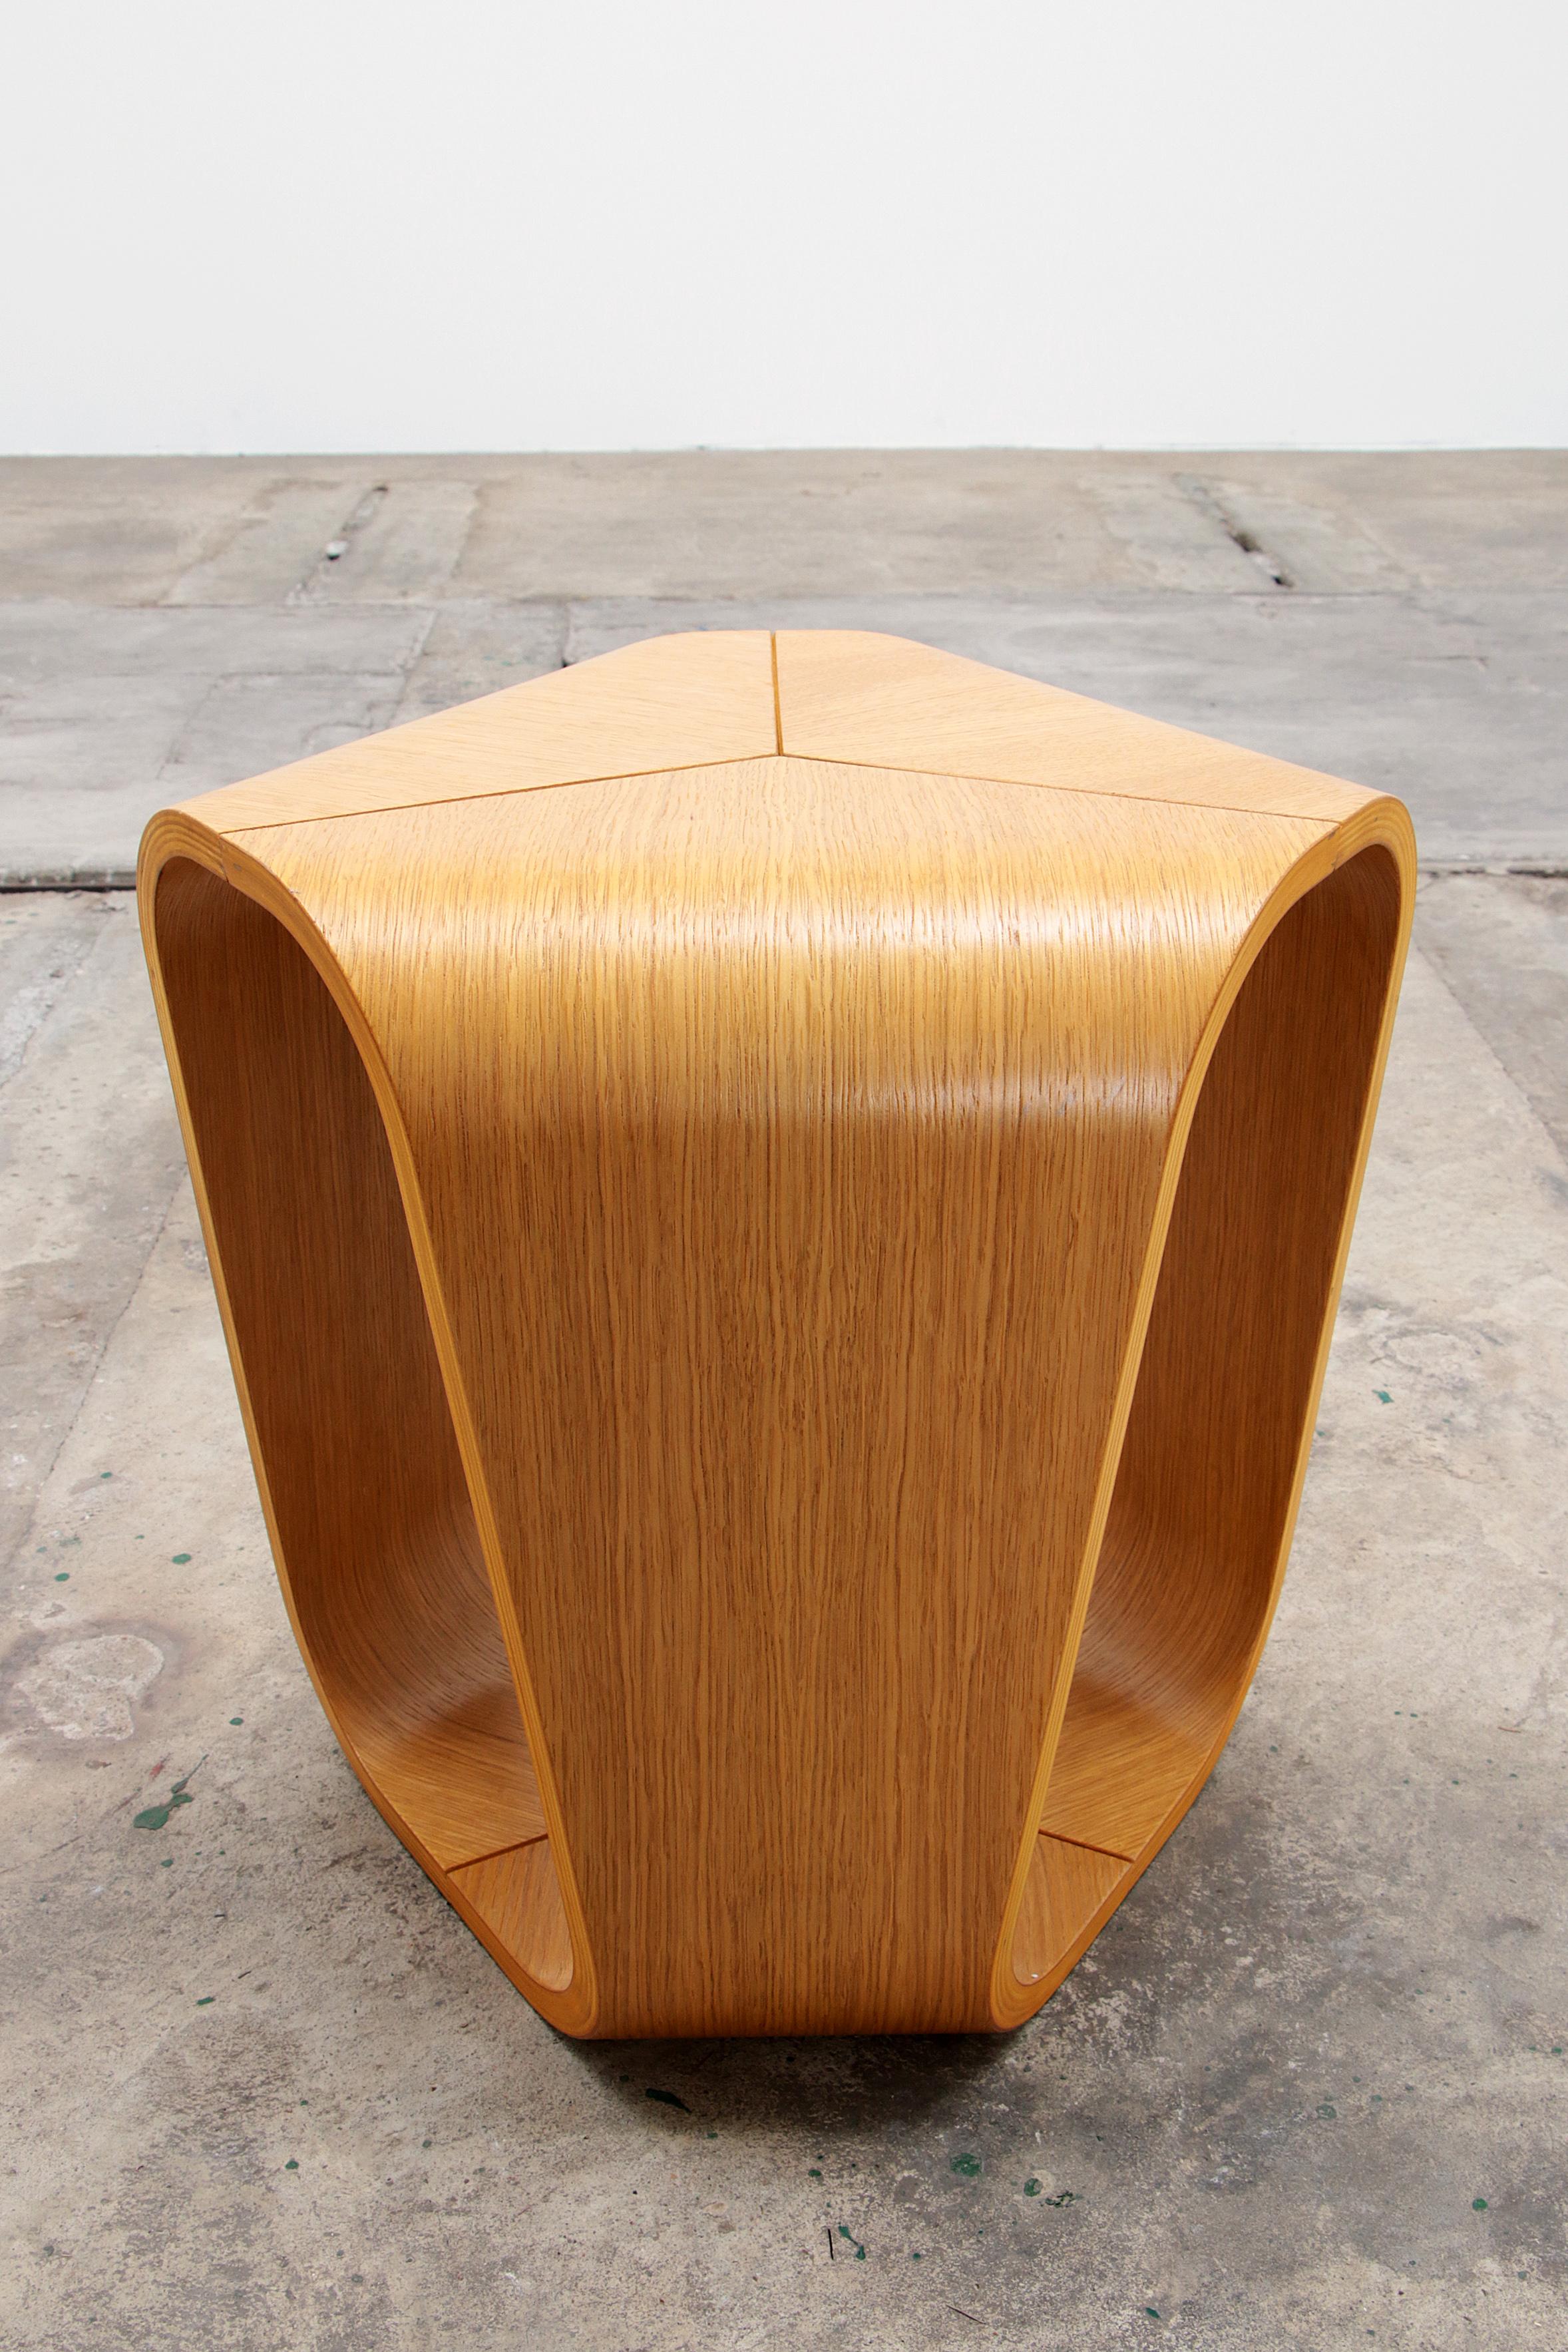 Plywood Set of side tables by Enrico Cesana by Busnelli, 1990 Italy.